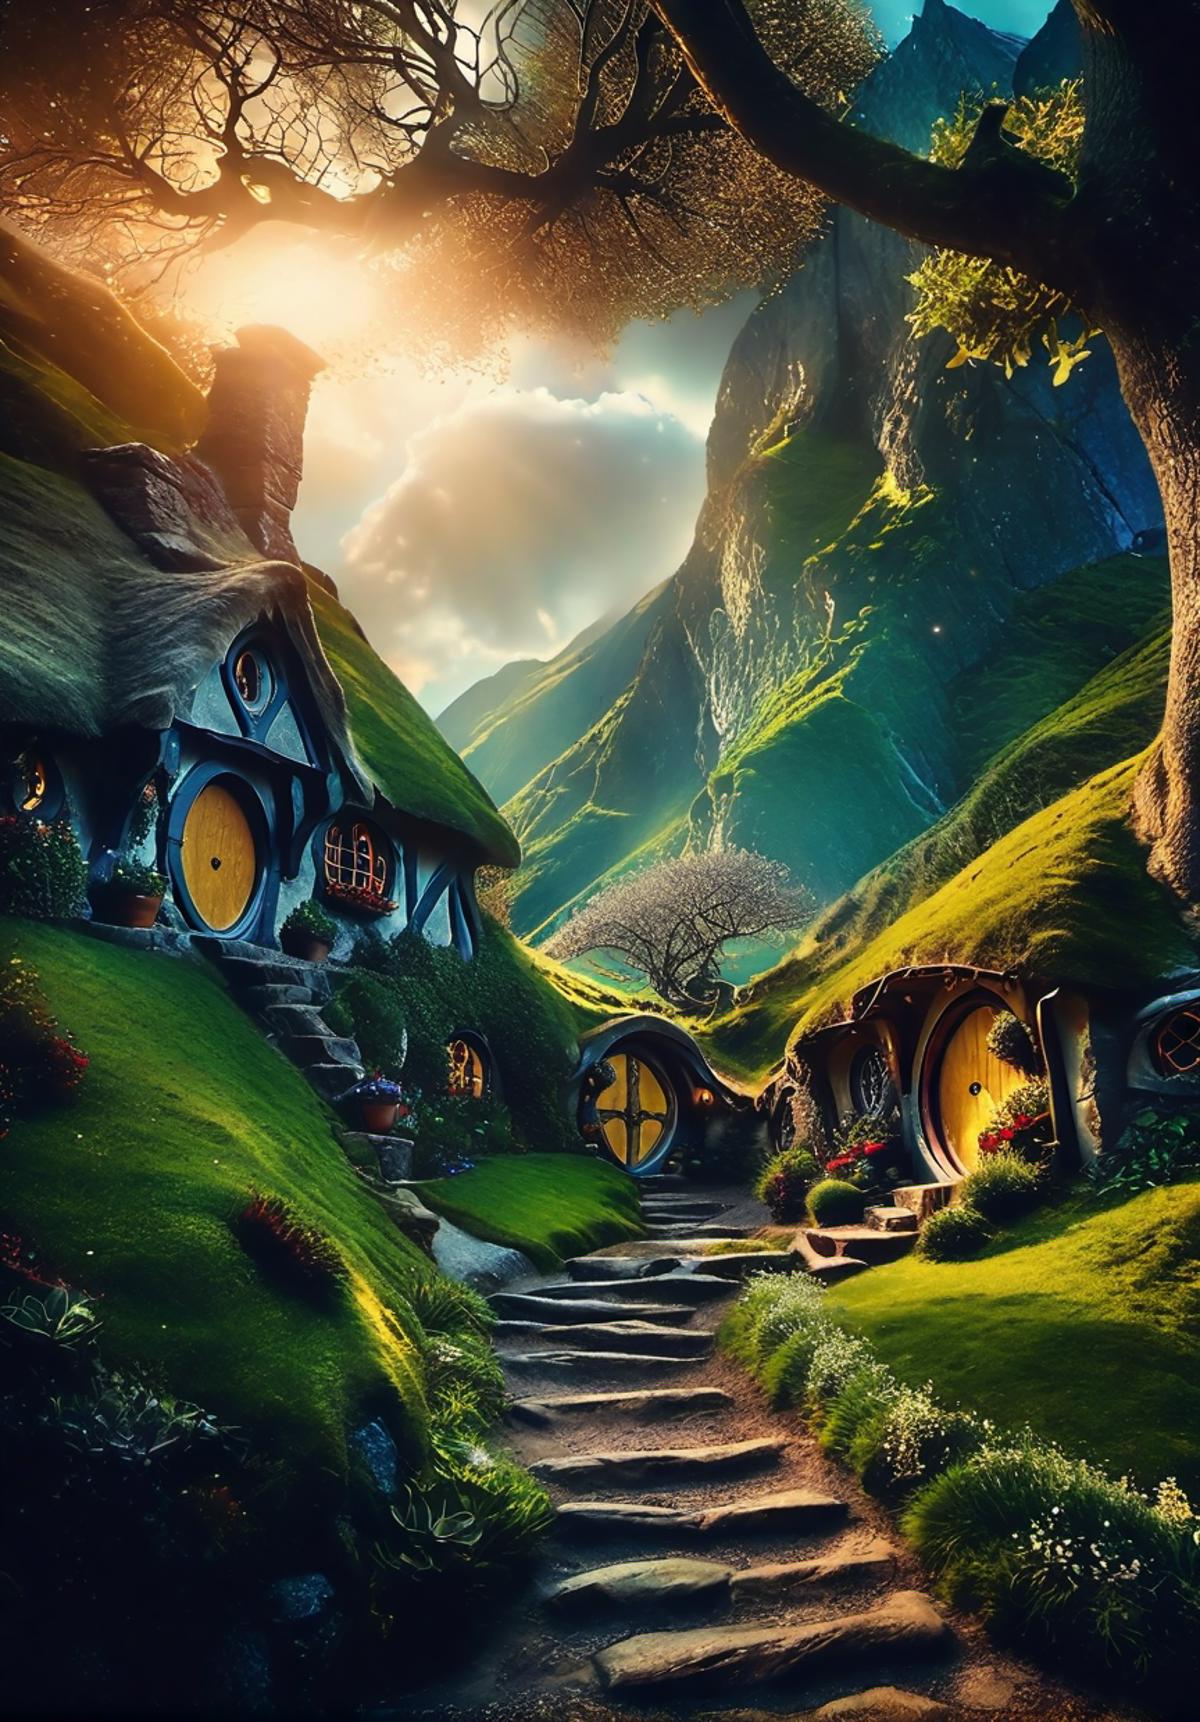 The Shire from The Hobbit: A picturesque landscape with a mountain in the background and hobbit holes.